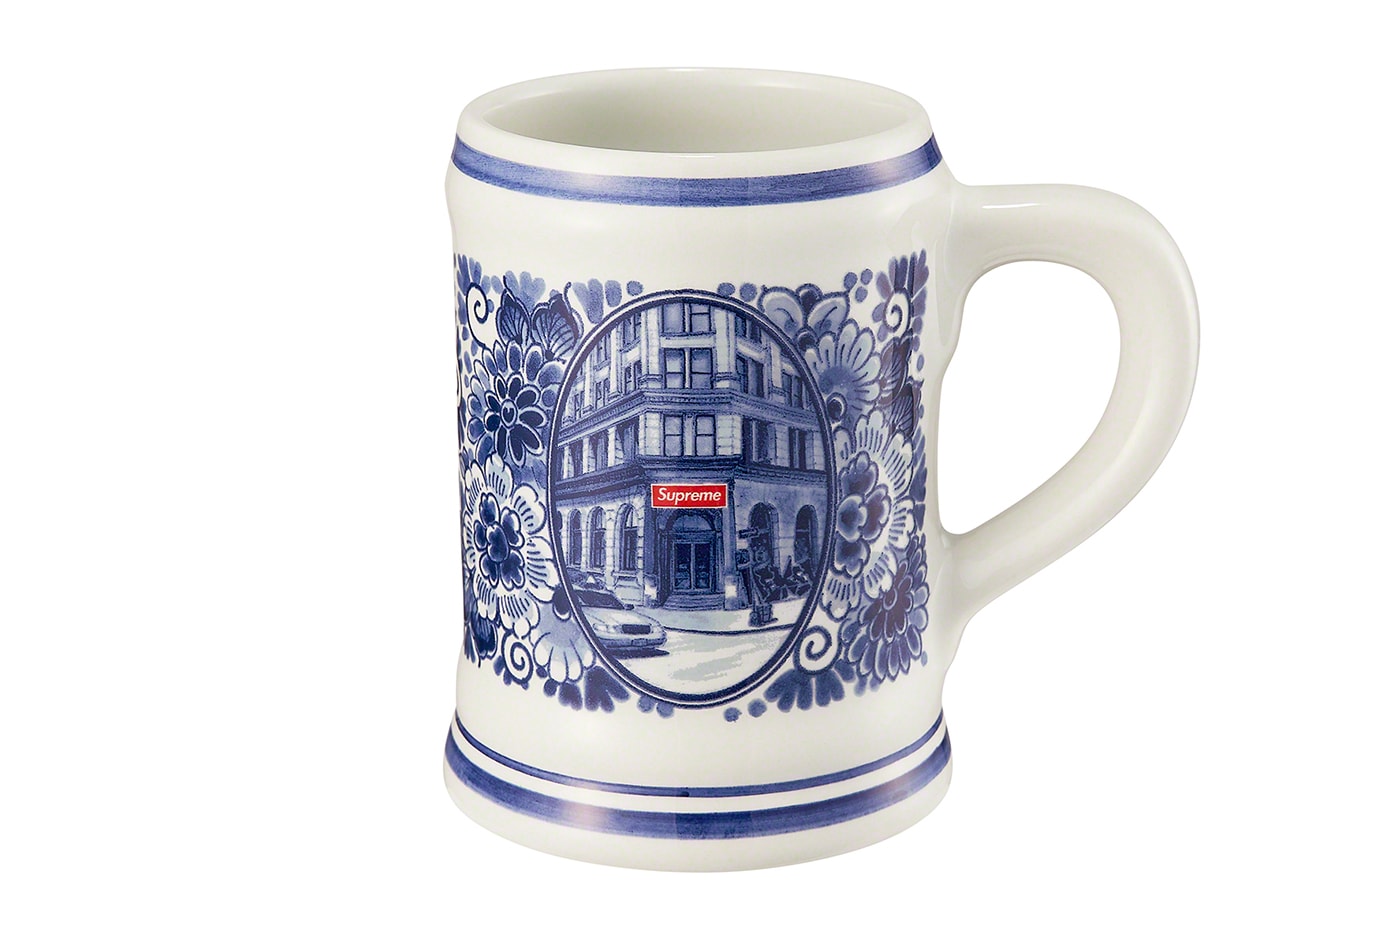 supreme spring summer 2021 ss21 collection drop accessories royal delft cup mug